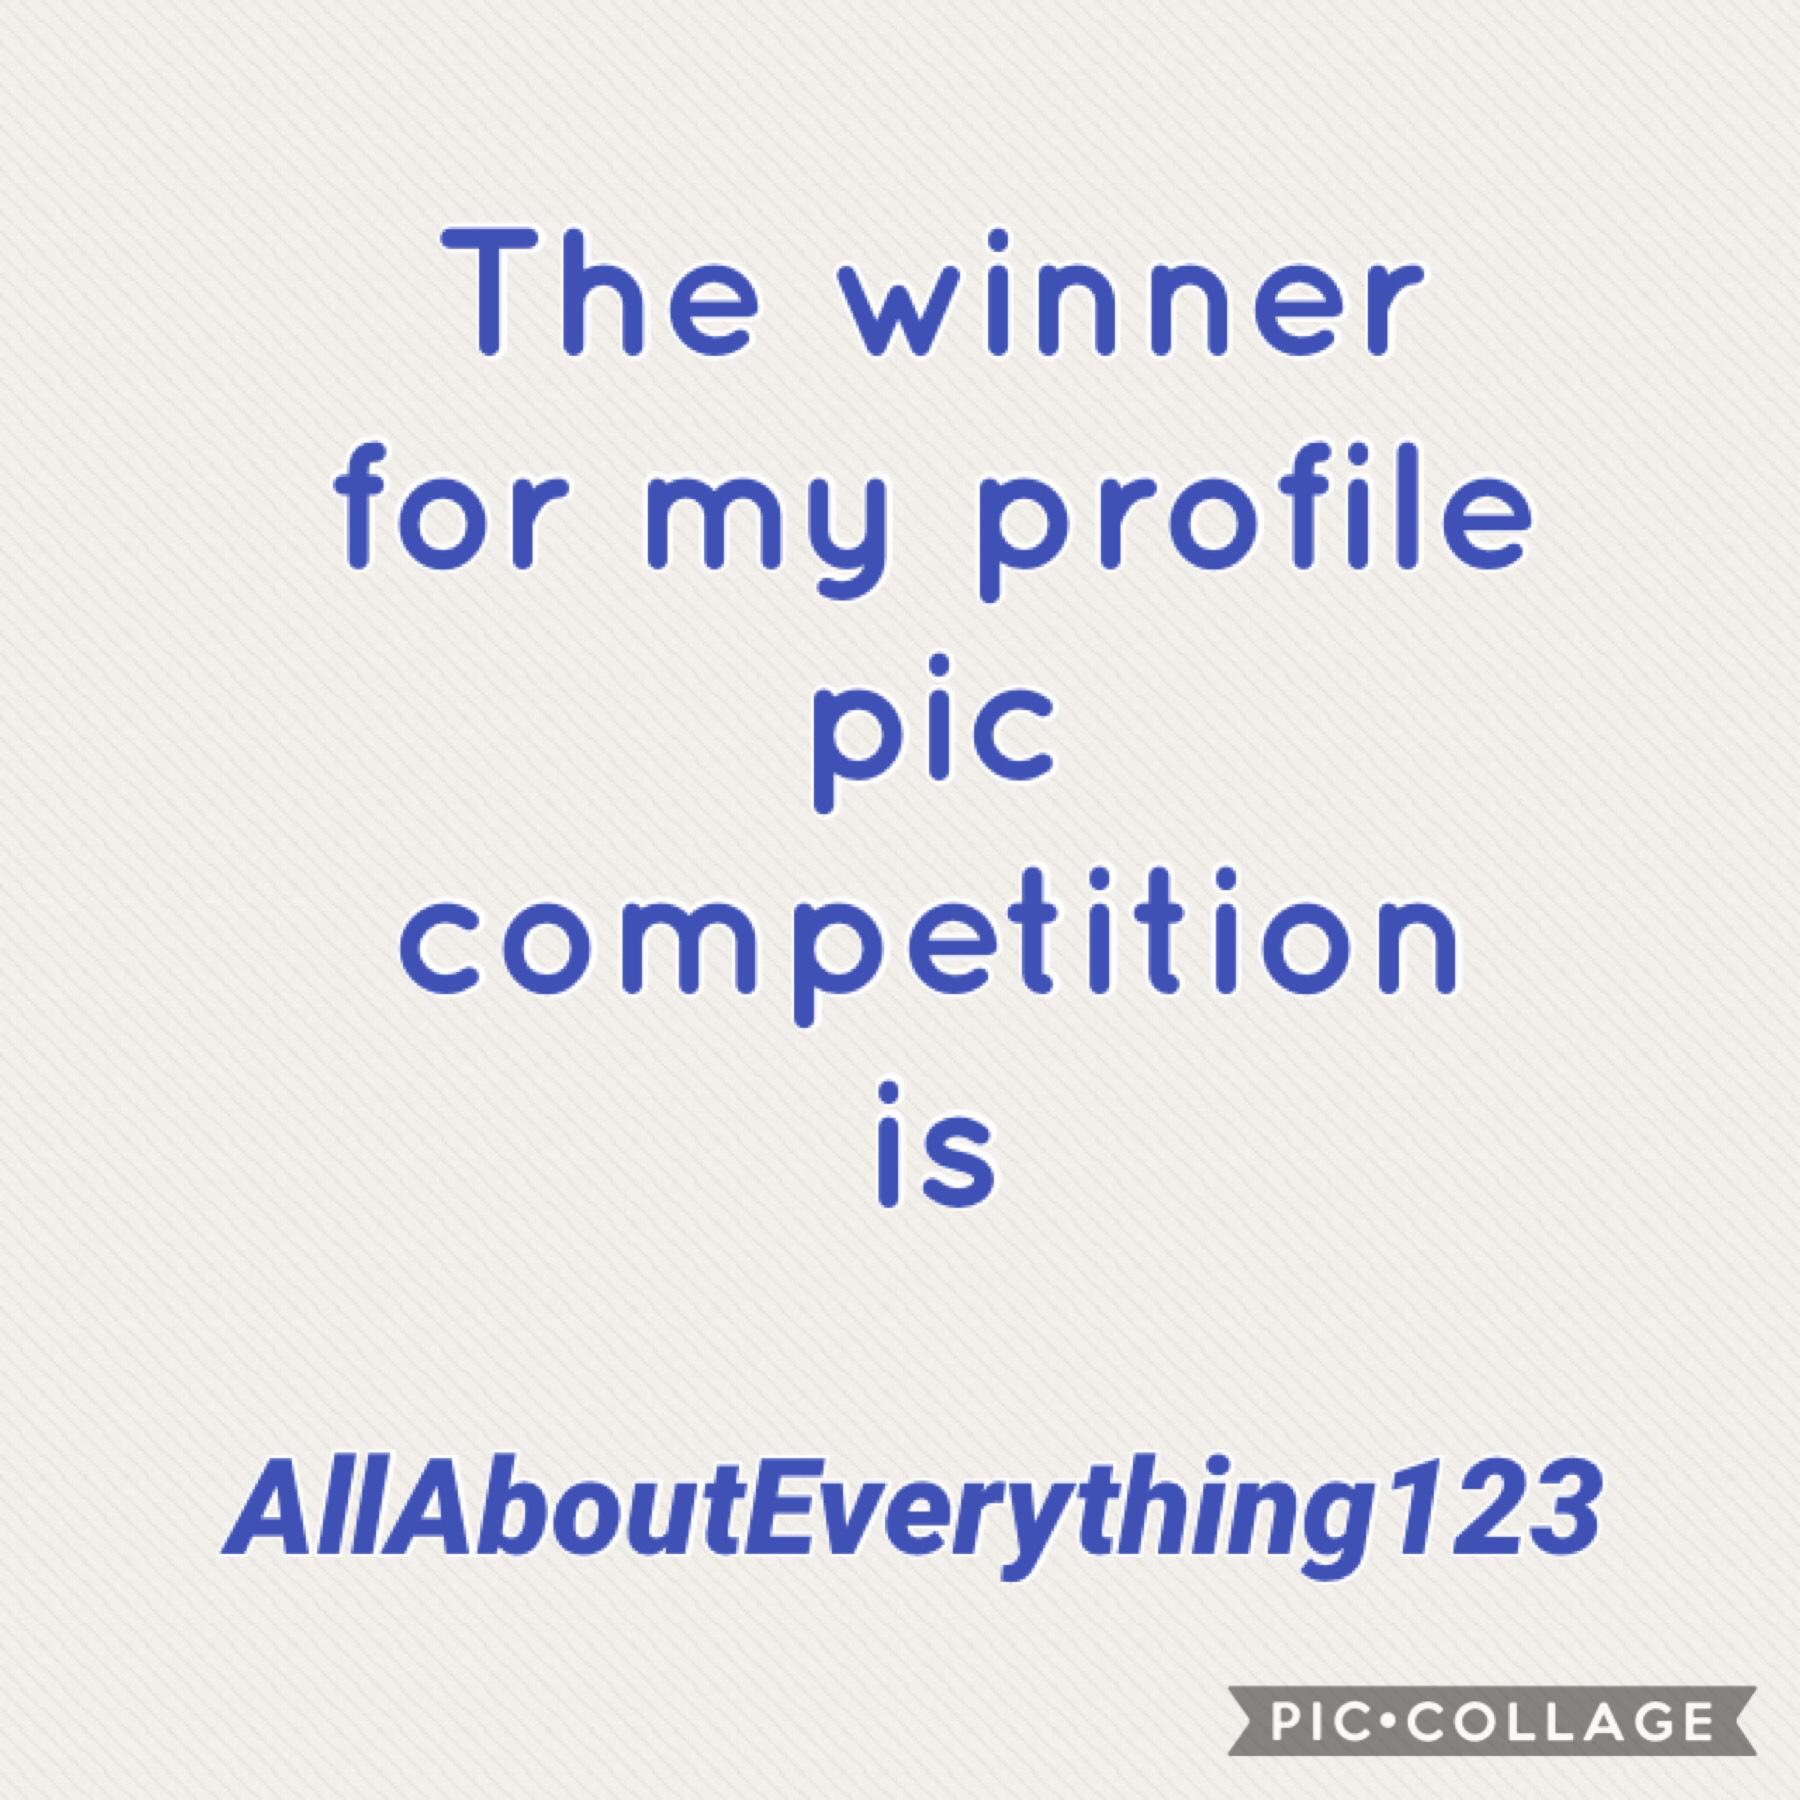 You can see the winning profile pic... because it’s mine. Bet you wish you had it 